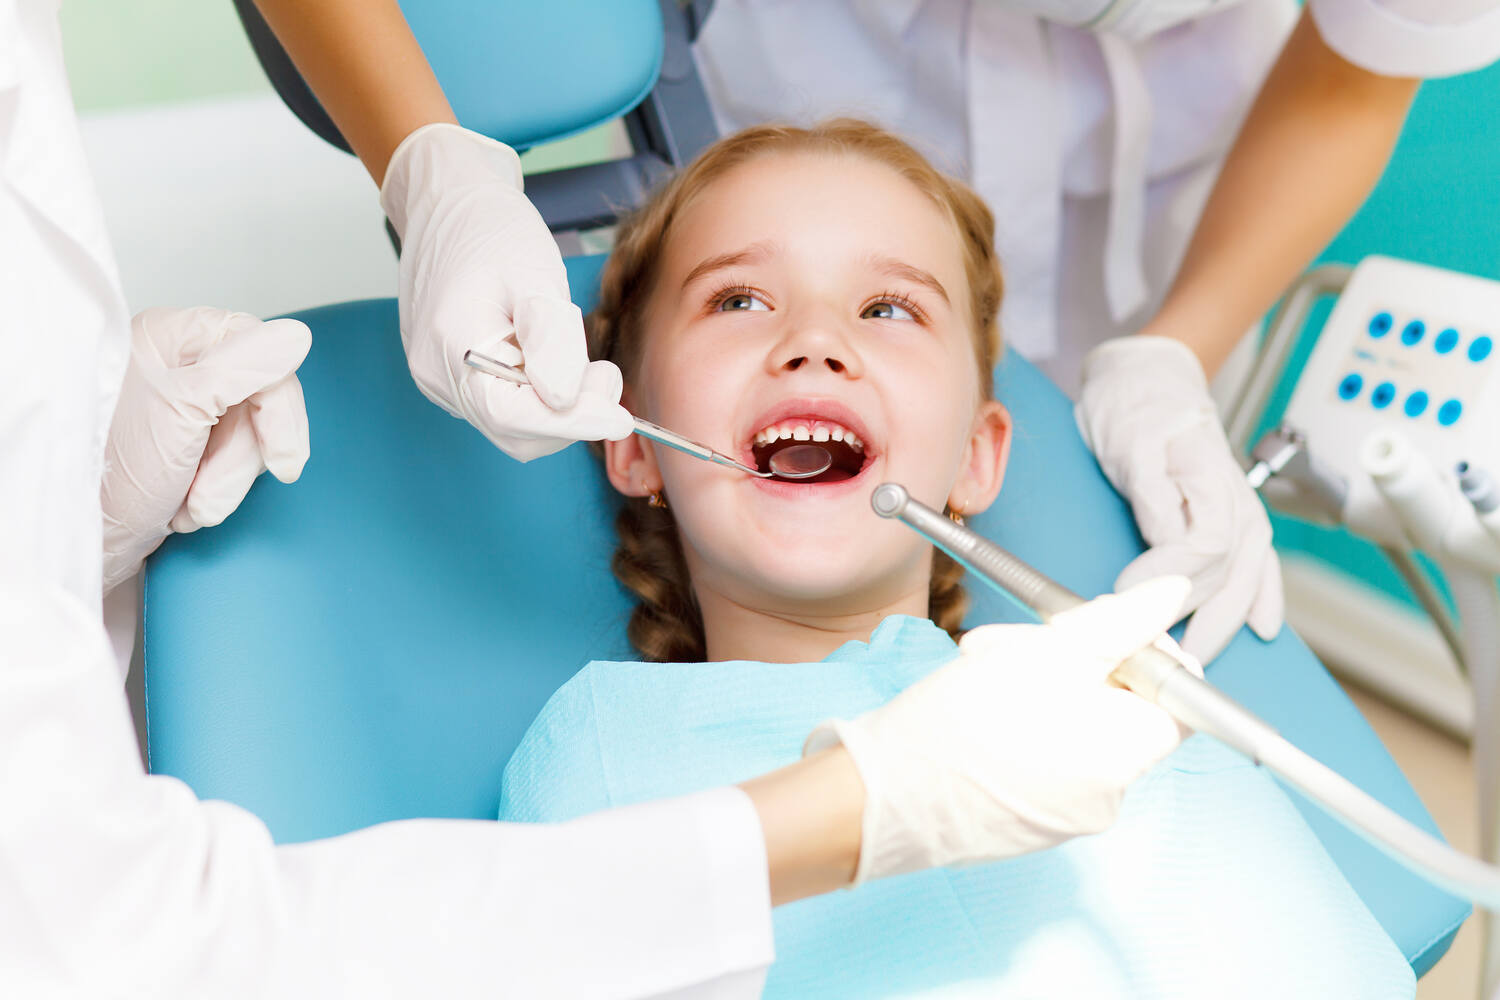 A dentists checking teeth of a child